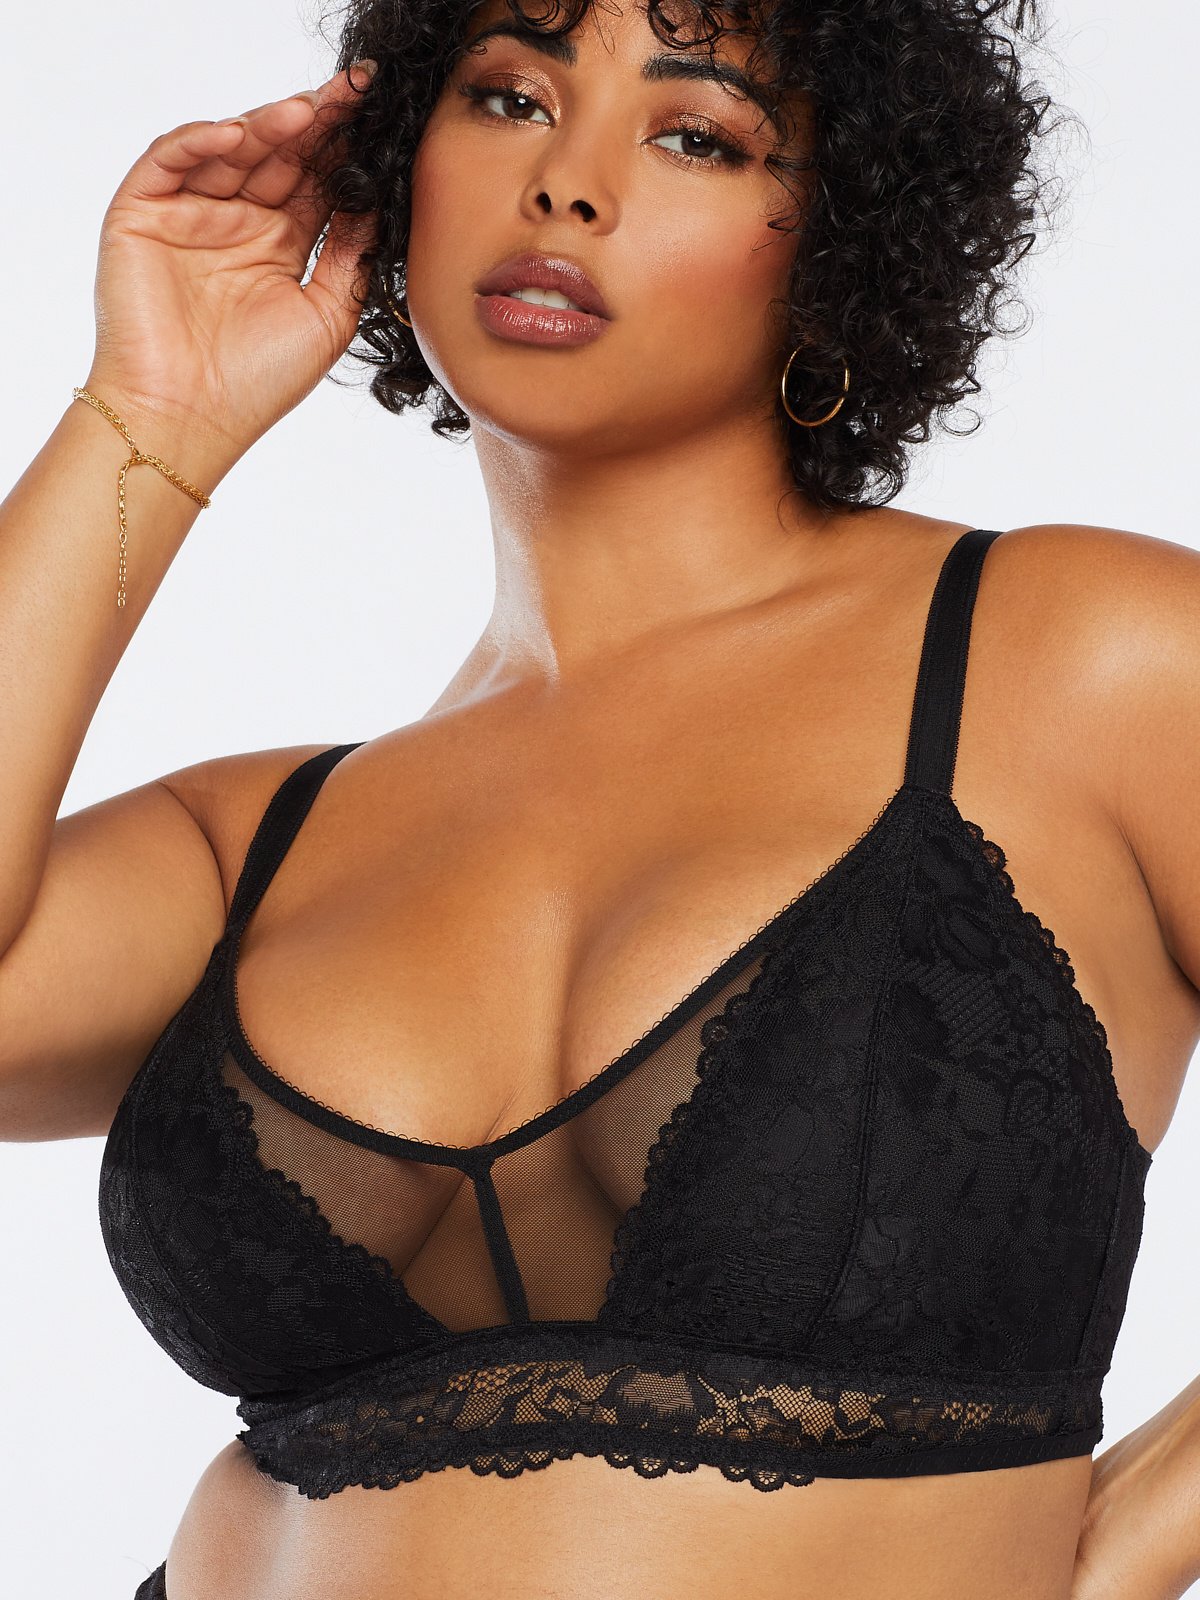 Floral Stitch Mesh Bralette - Knitted Belle Boutique